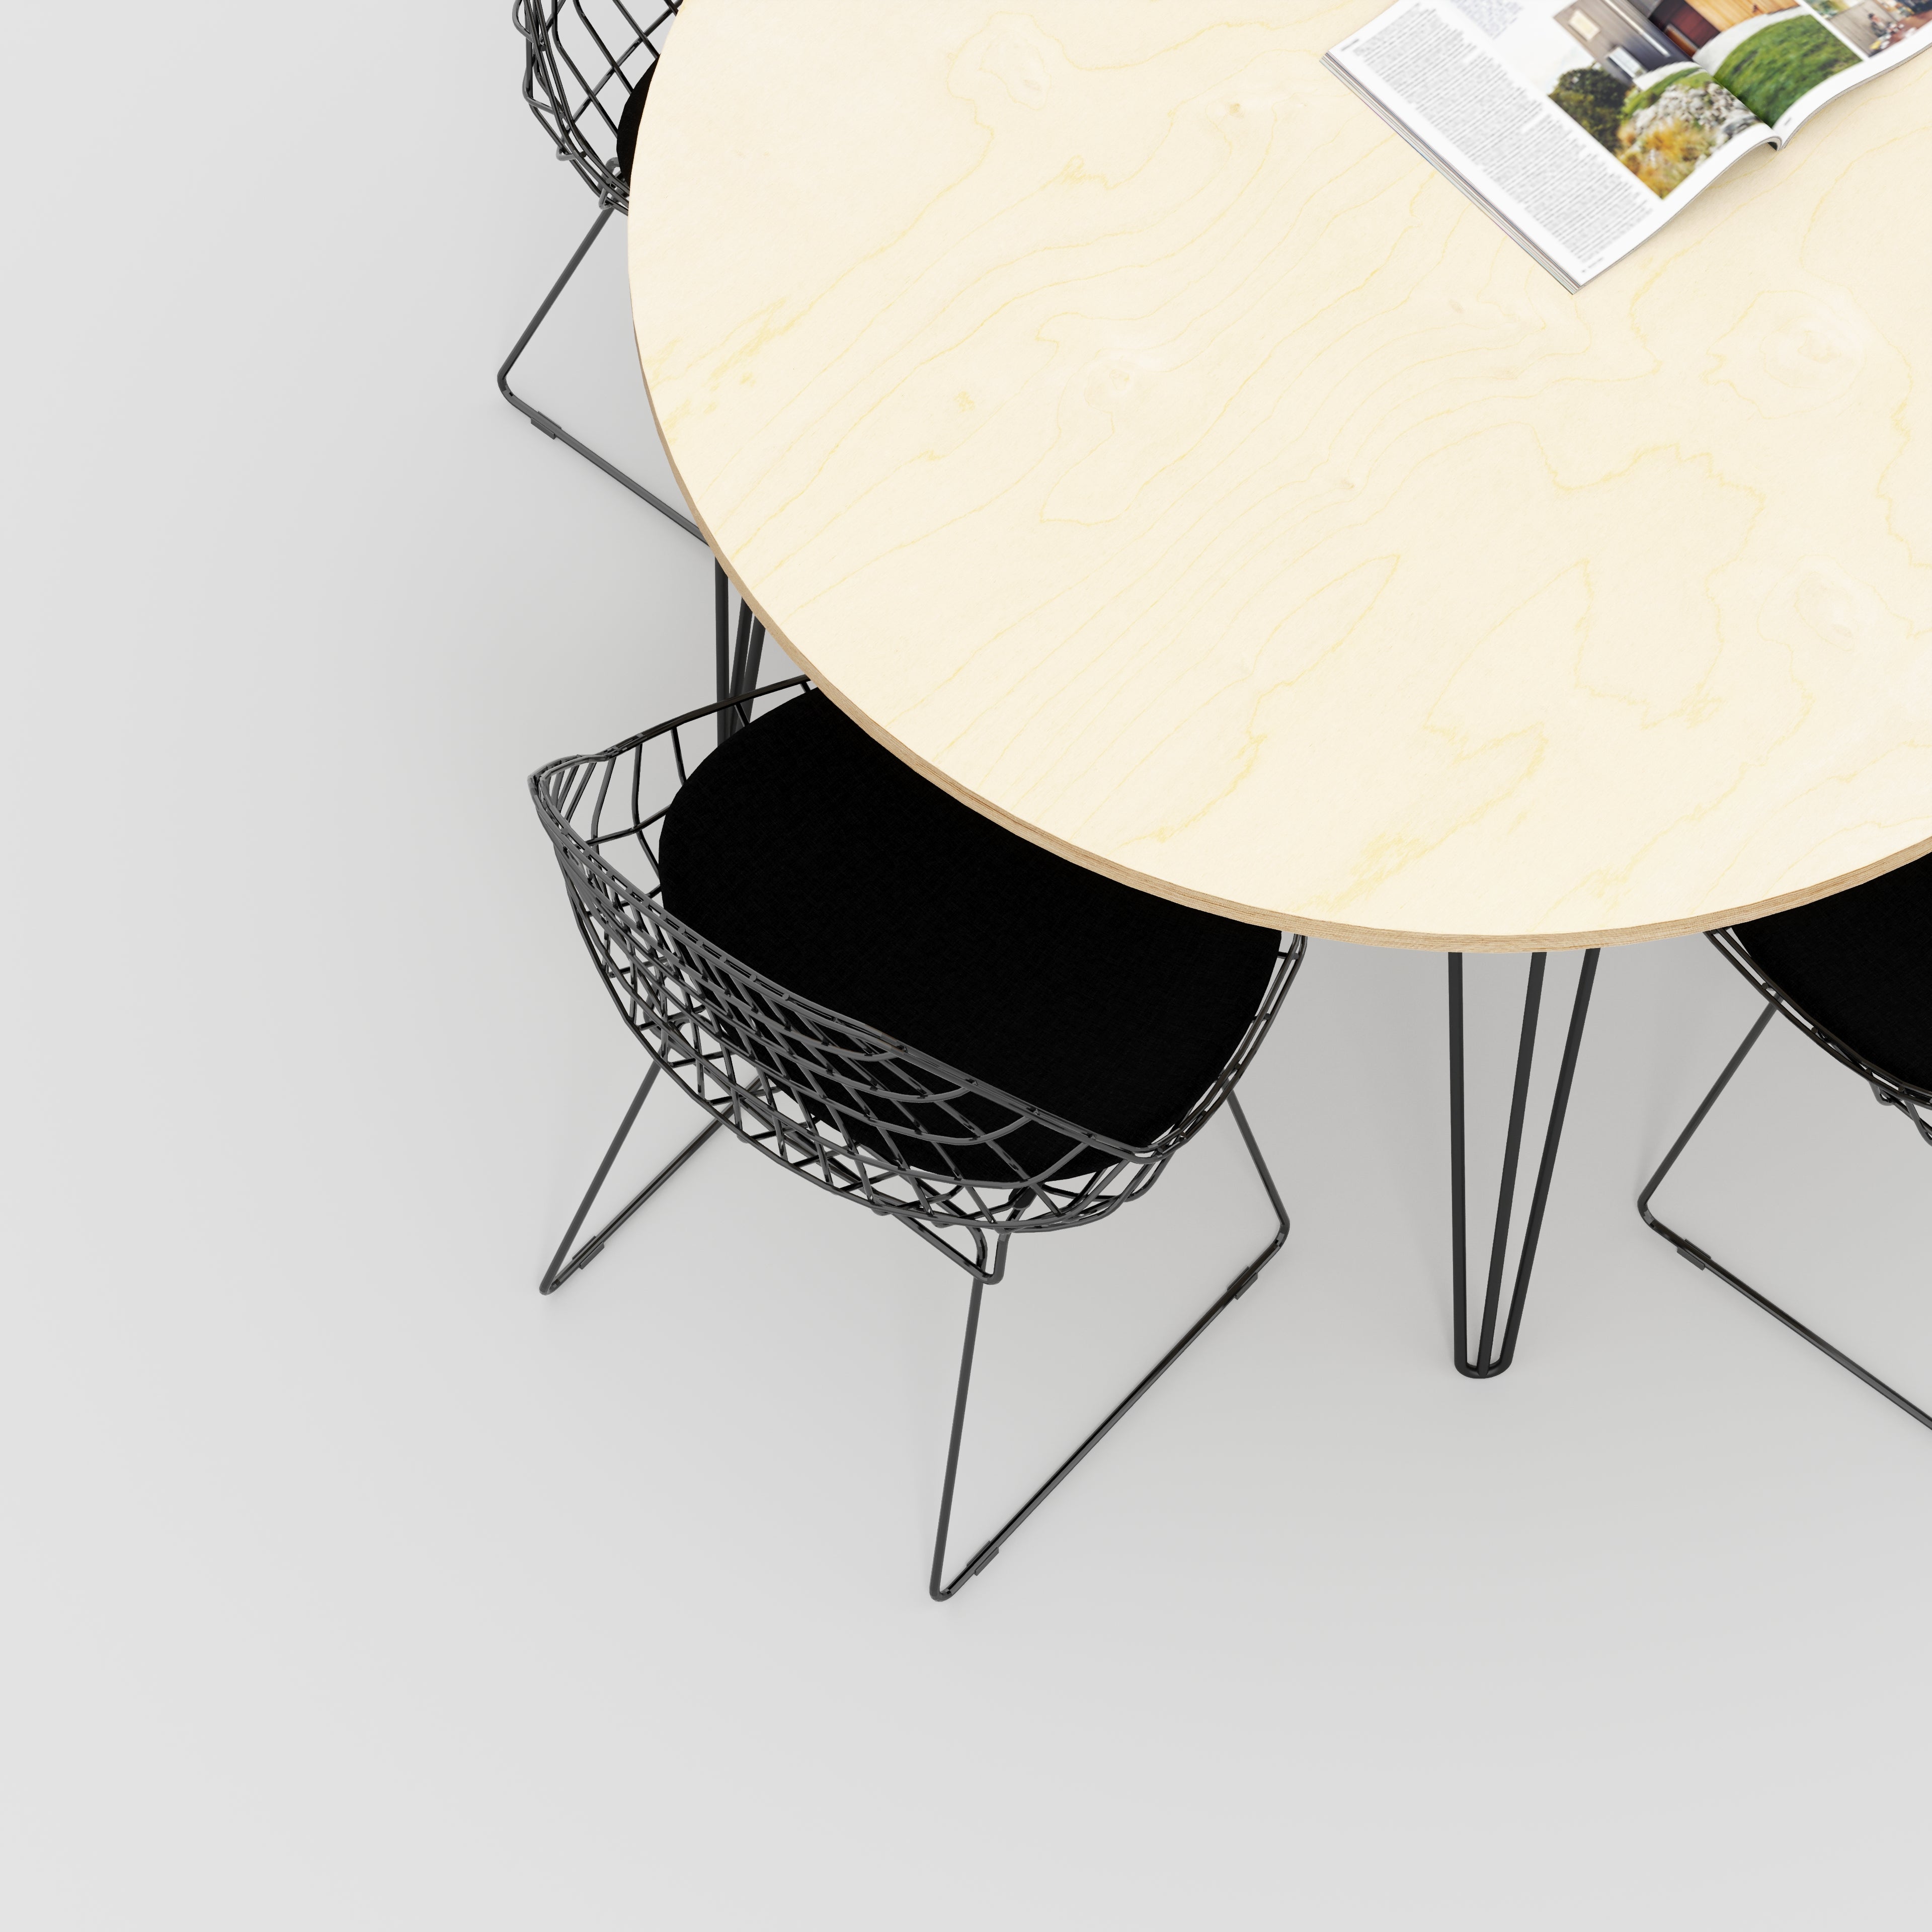 Custom Plywood Round Table with Hairpin Legs